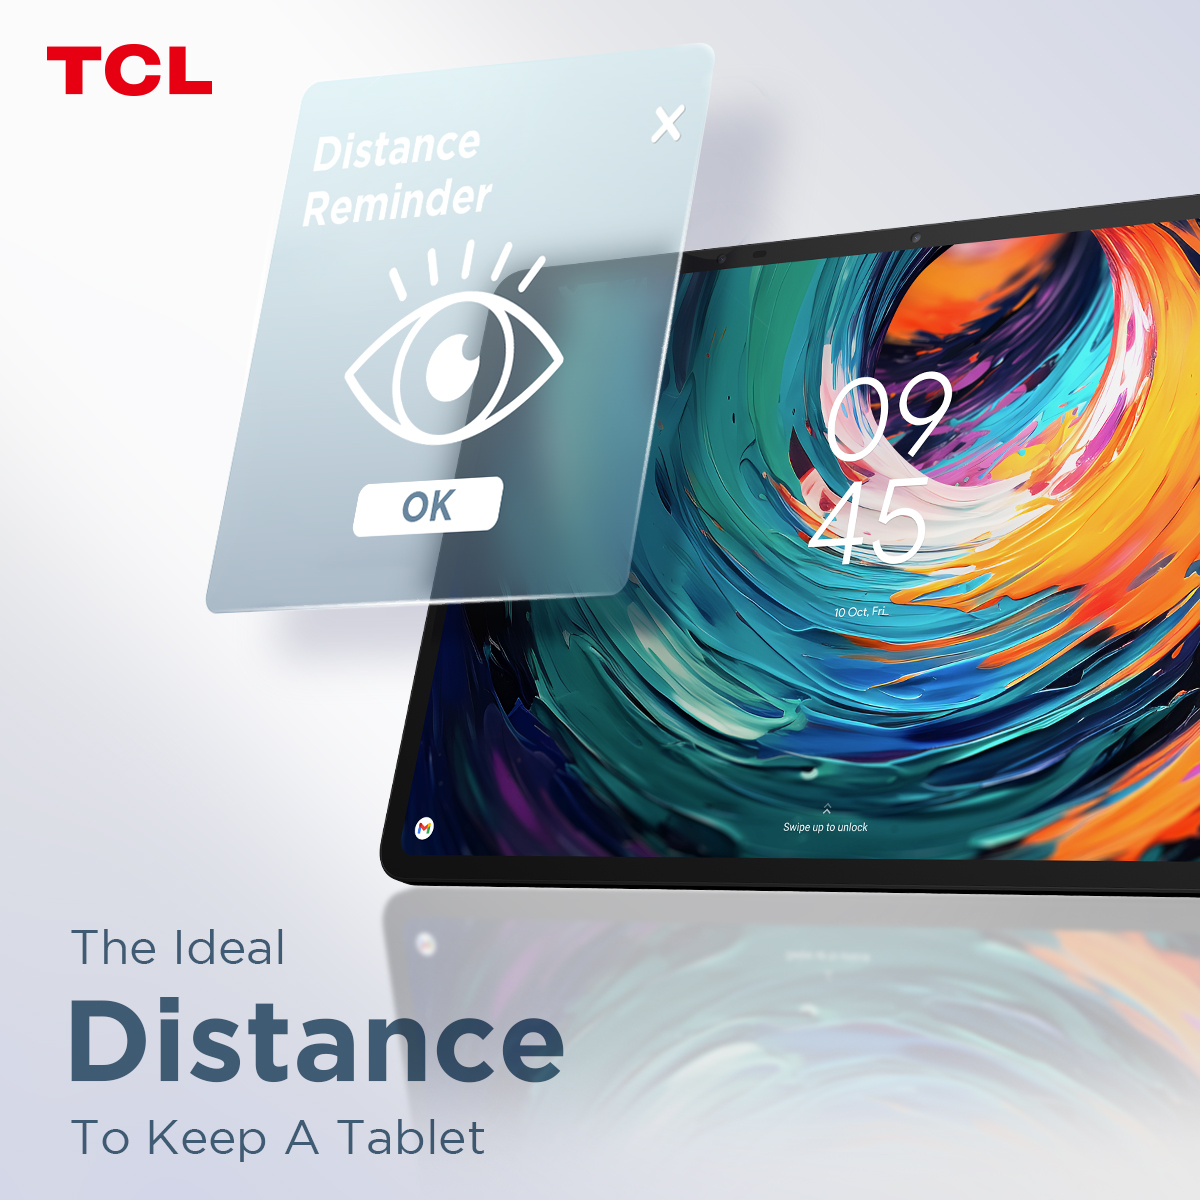 🚀 Calling all tech-savvy ladies! 🚀 Why settle for tech that doesn't get us? Let's talk #TechforWomen: What's the ideal tablet distance? Let's change tech, one fabulous gadget at a time!💃

#EyeComfort #DisplayGreatness #INSPIREGREATNESS